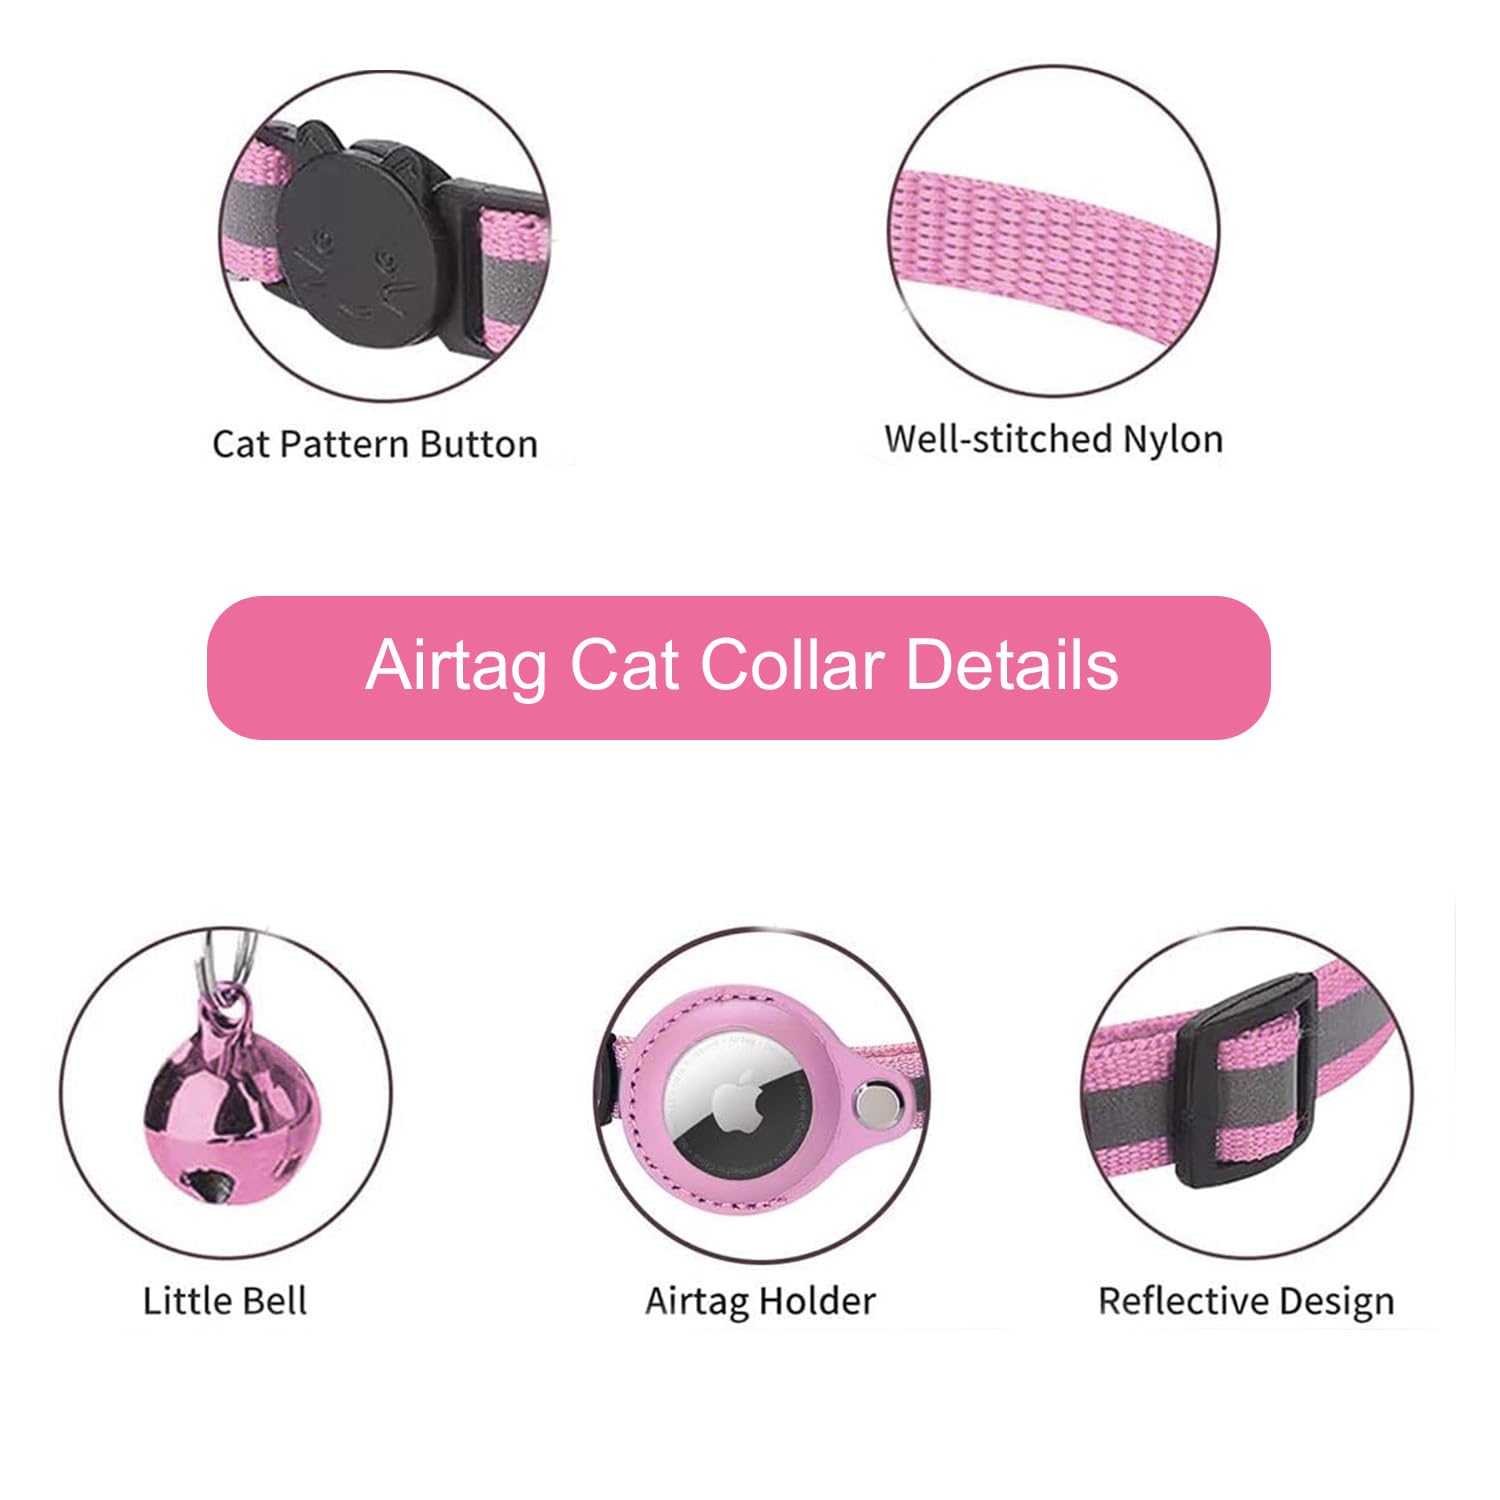 Cat Collar Breakaway with Airtag Holder - Adjustable Reflective AirTag Cat Collar with Bell Integrated Kitten Collar GPS Cat Collars Tracker for Girl Boy Cats Puppies (Black)